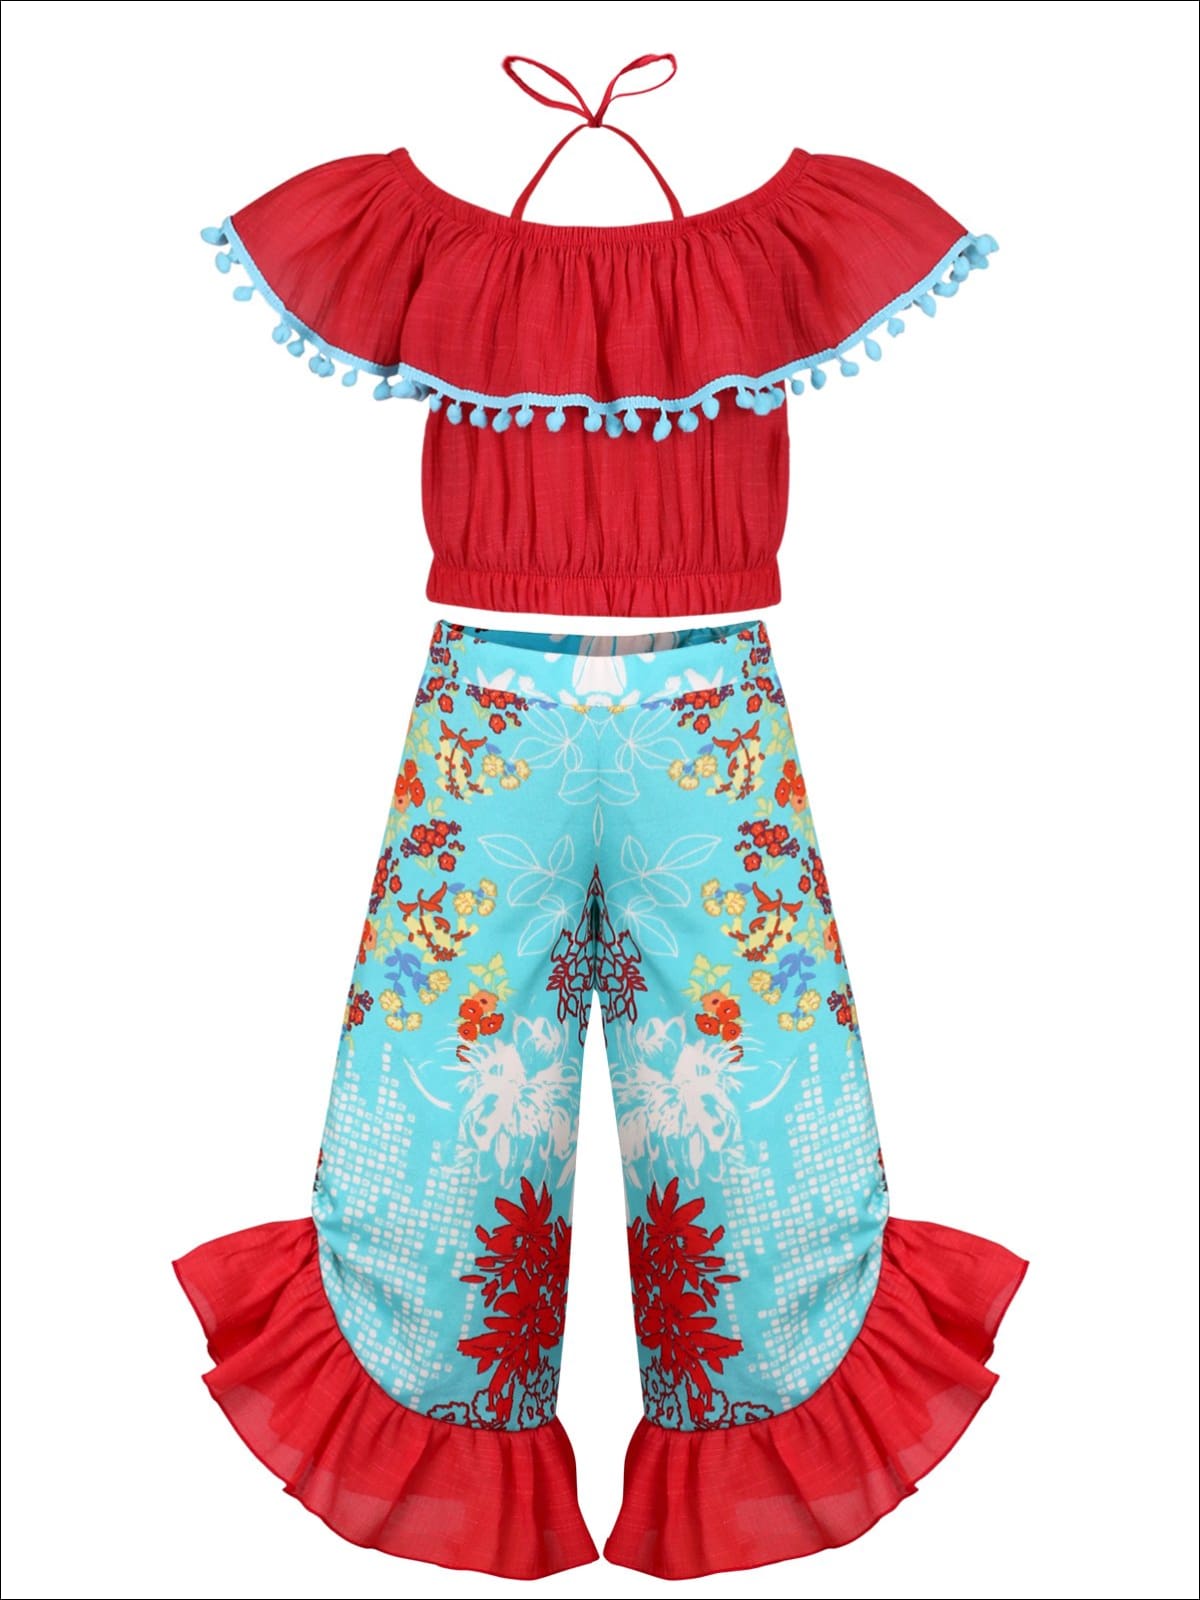 Girls Off the Shoulder Trimmed Ruffle Halter Neck Top & Floral Ruffled Palazzo Pants Set - Red / 2T/3T - Girls Spring Casual Set